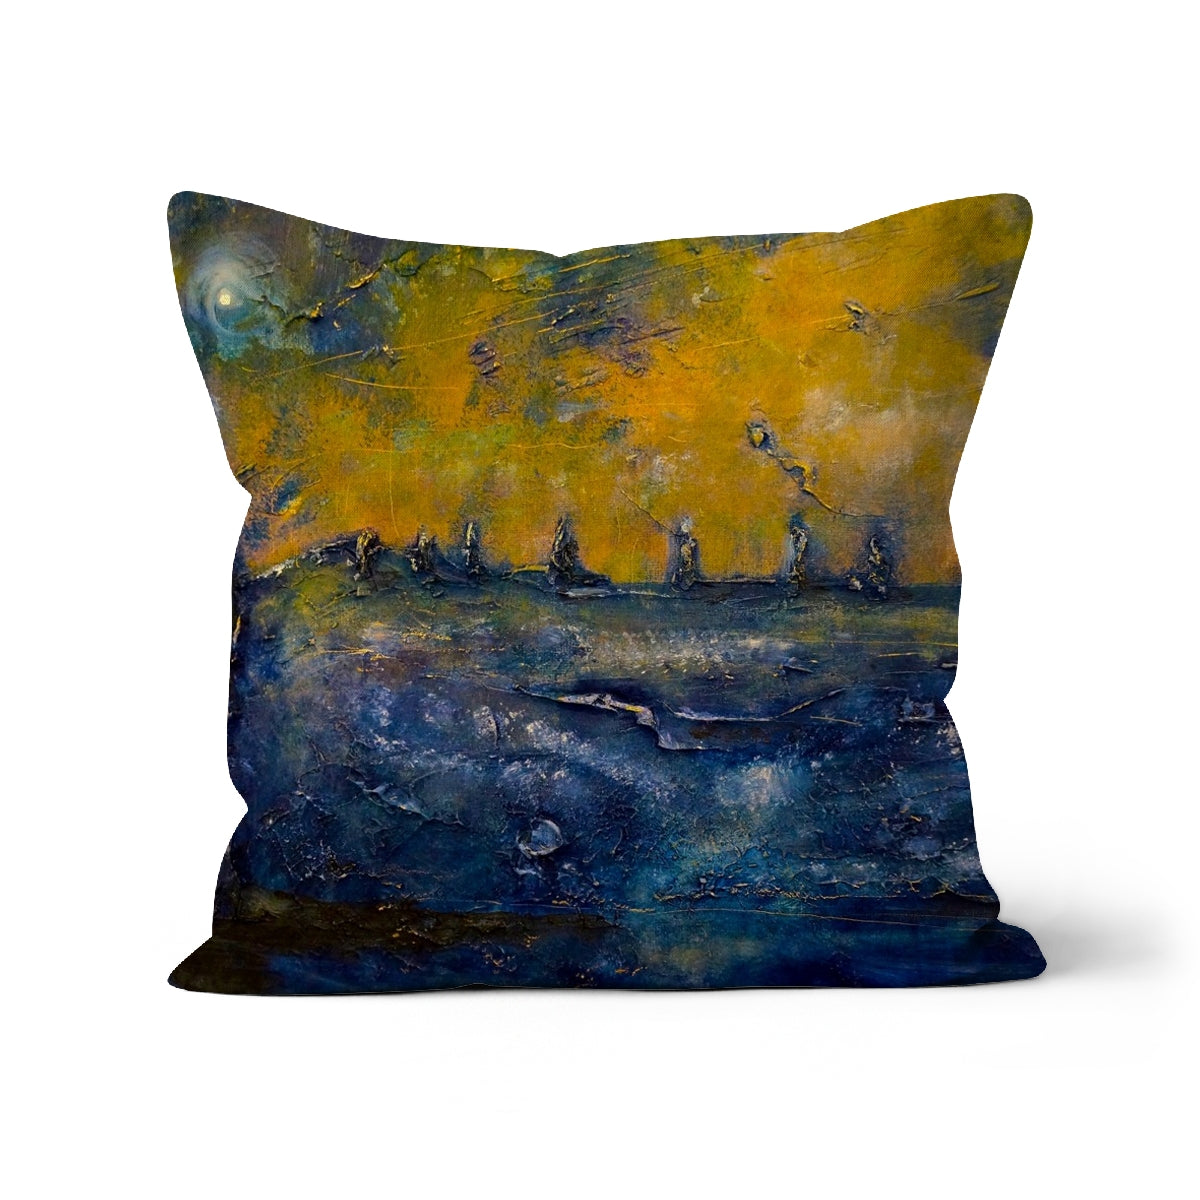 Brodgar Moonlight Orkney Art Gifts Cushion-Cushions-Orkney Art Gallery-Linen-18"x18"-Paintings, Prints, Homeware, Art Gifts From Scotland By Scottish Artist Kevin Hunter